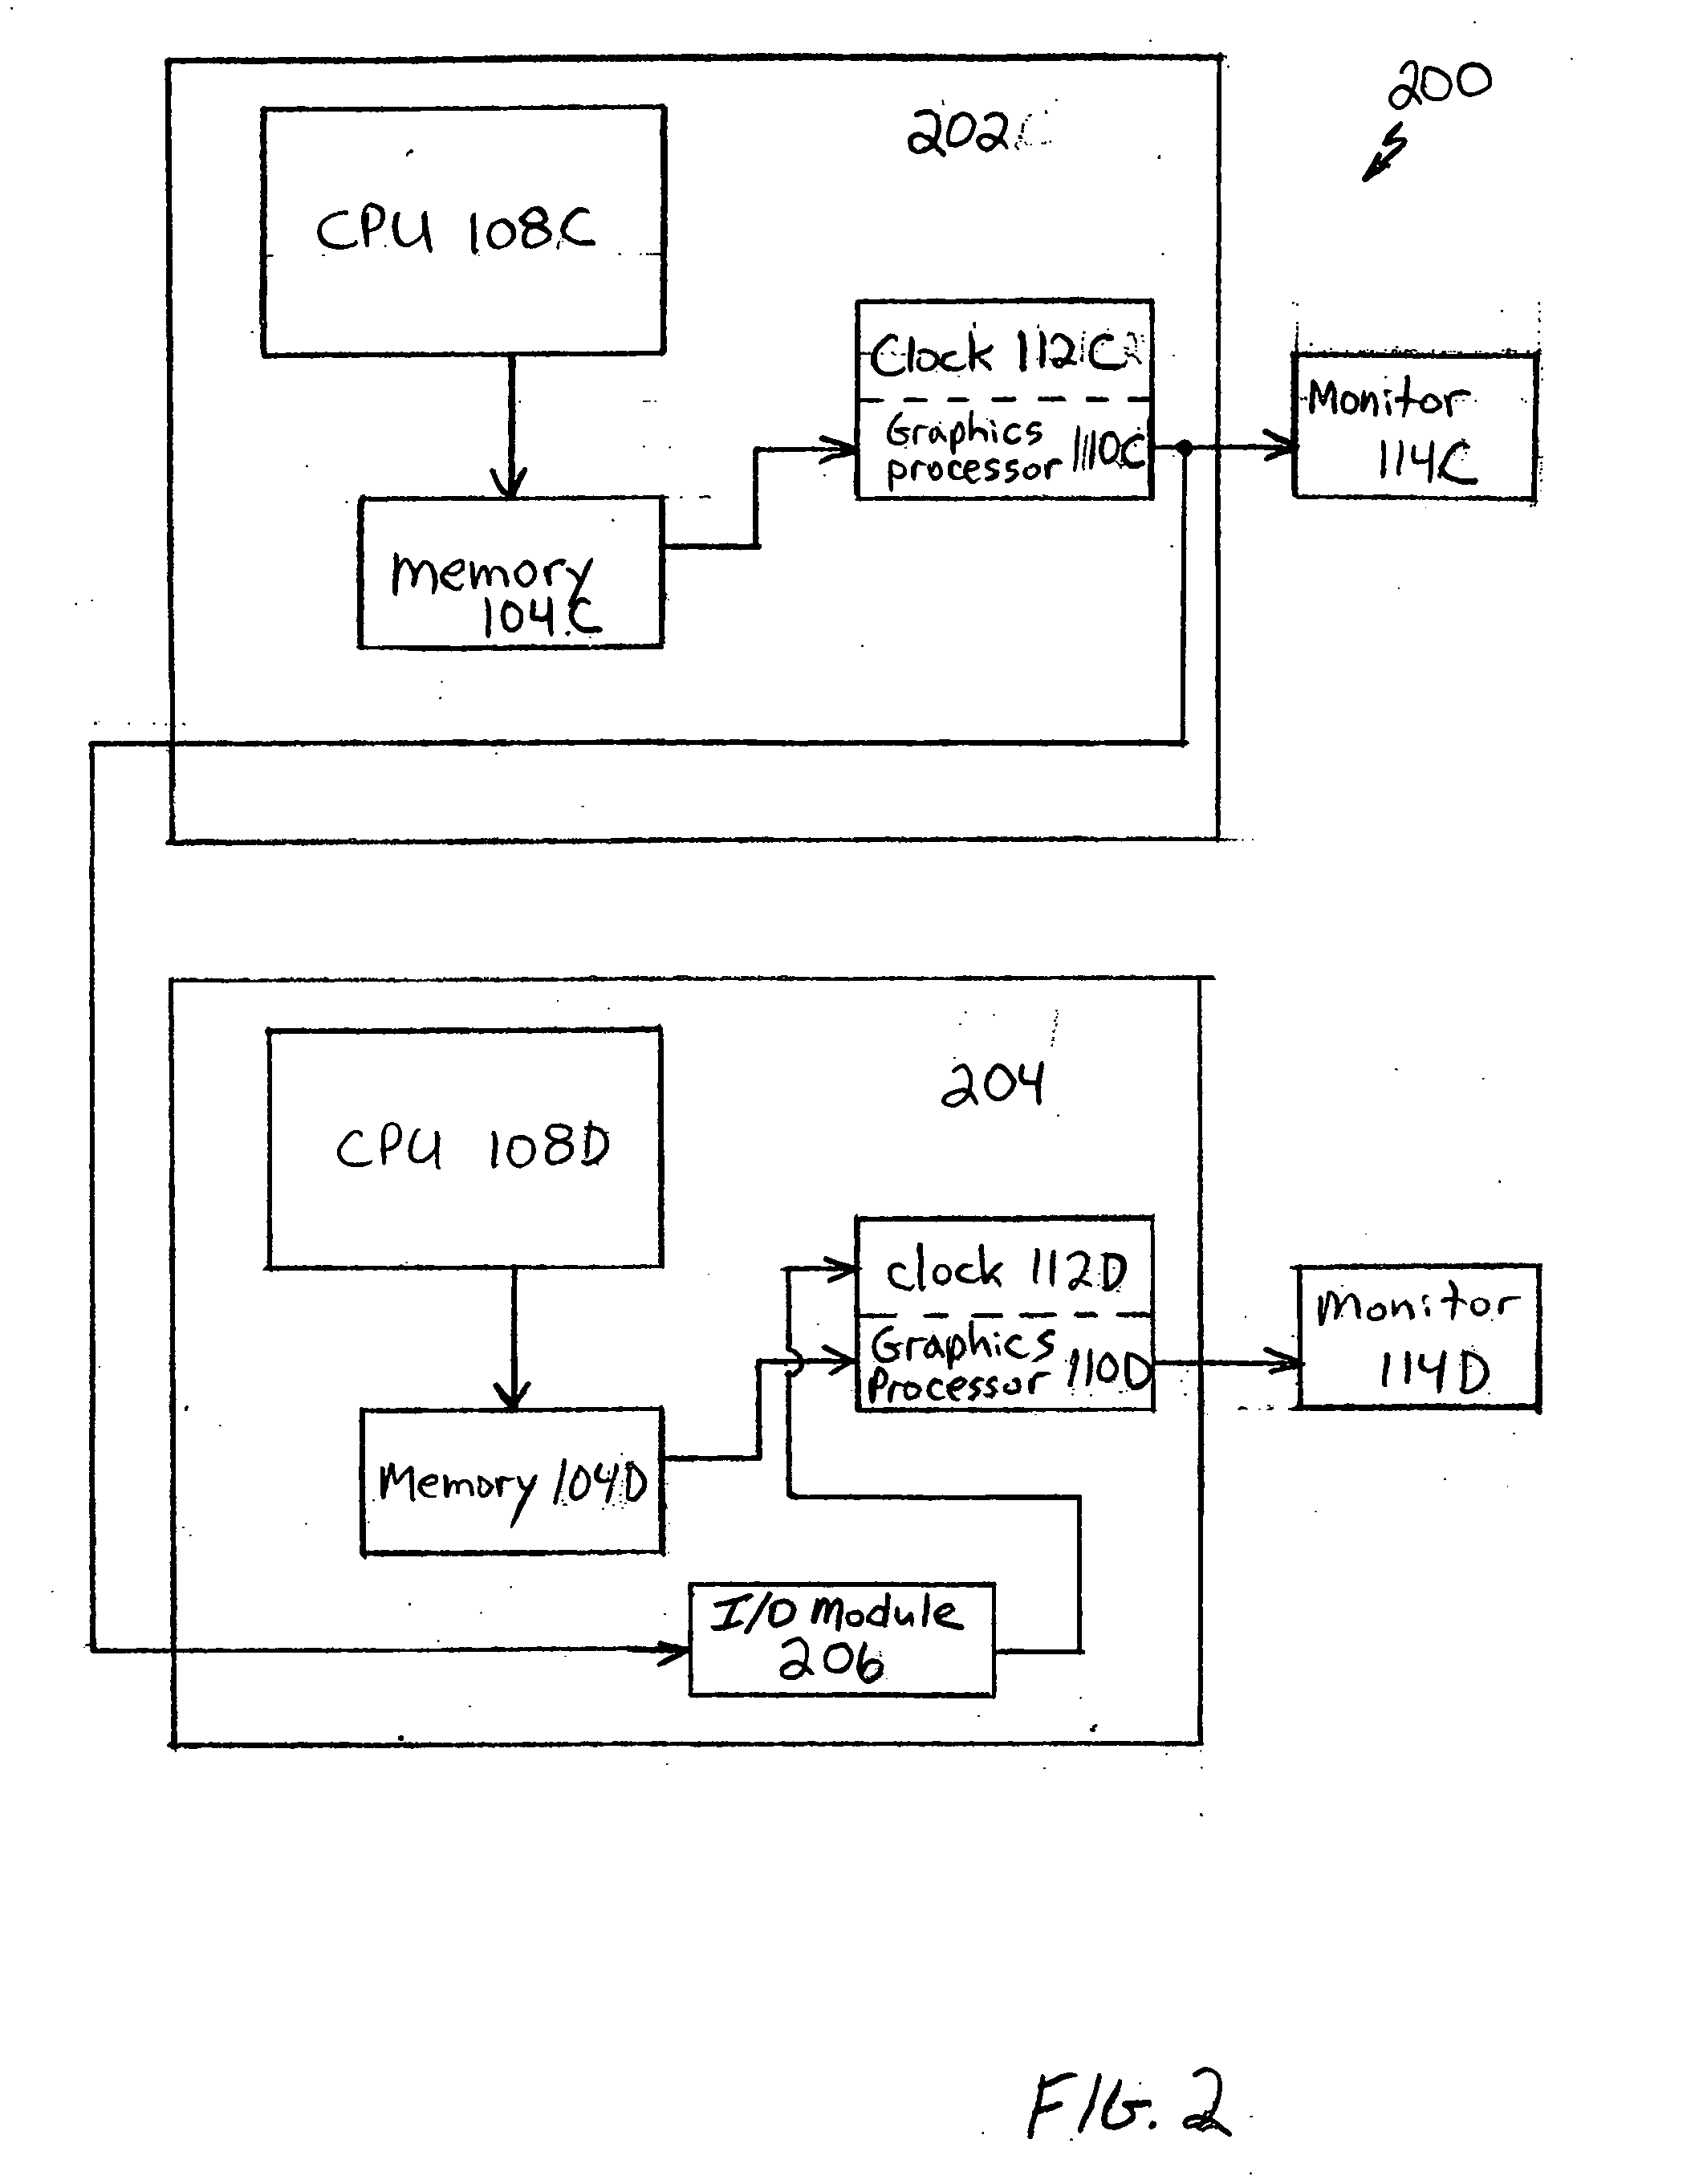 System for synchronizing display of images in a multi-display computer system